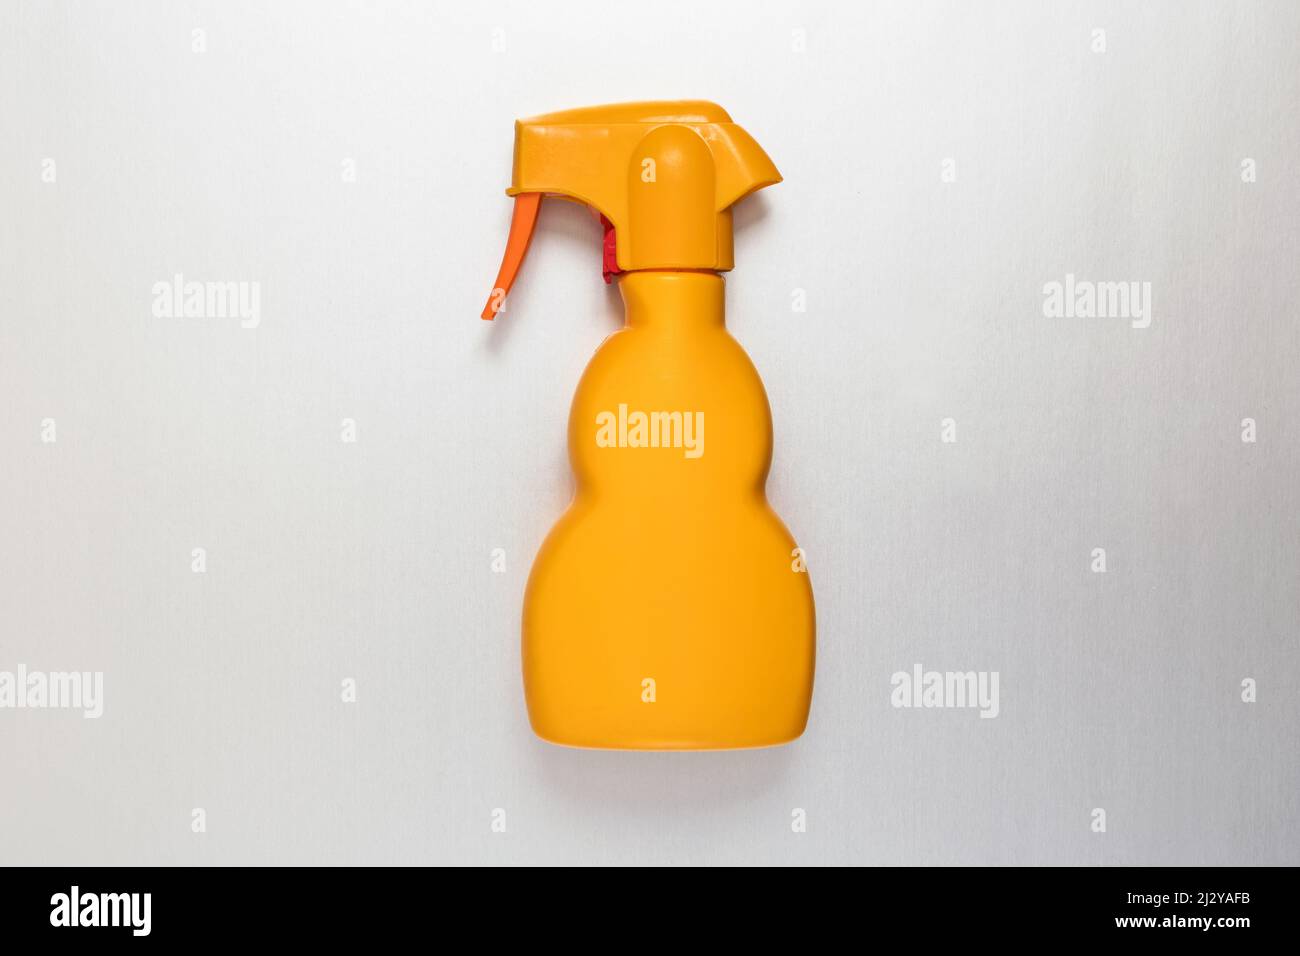 Generic unlabelled yellow plastic spray bottle lying flat on white in a concept of retail packaging and household hygiene with copyspace Stock Photo